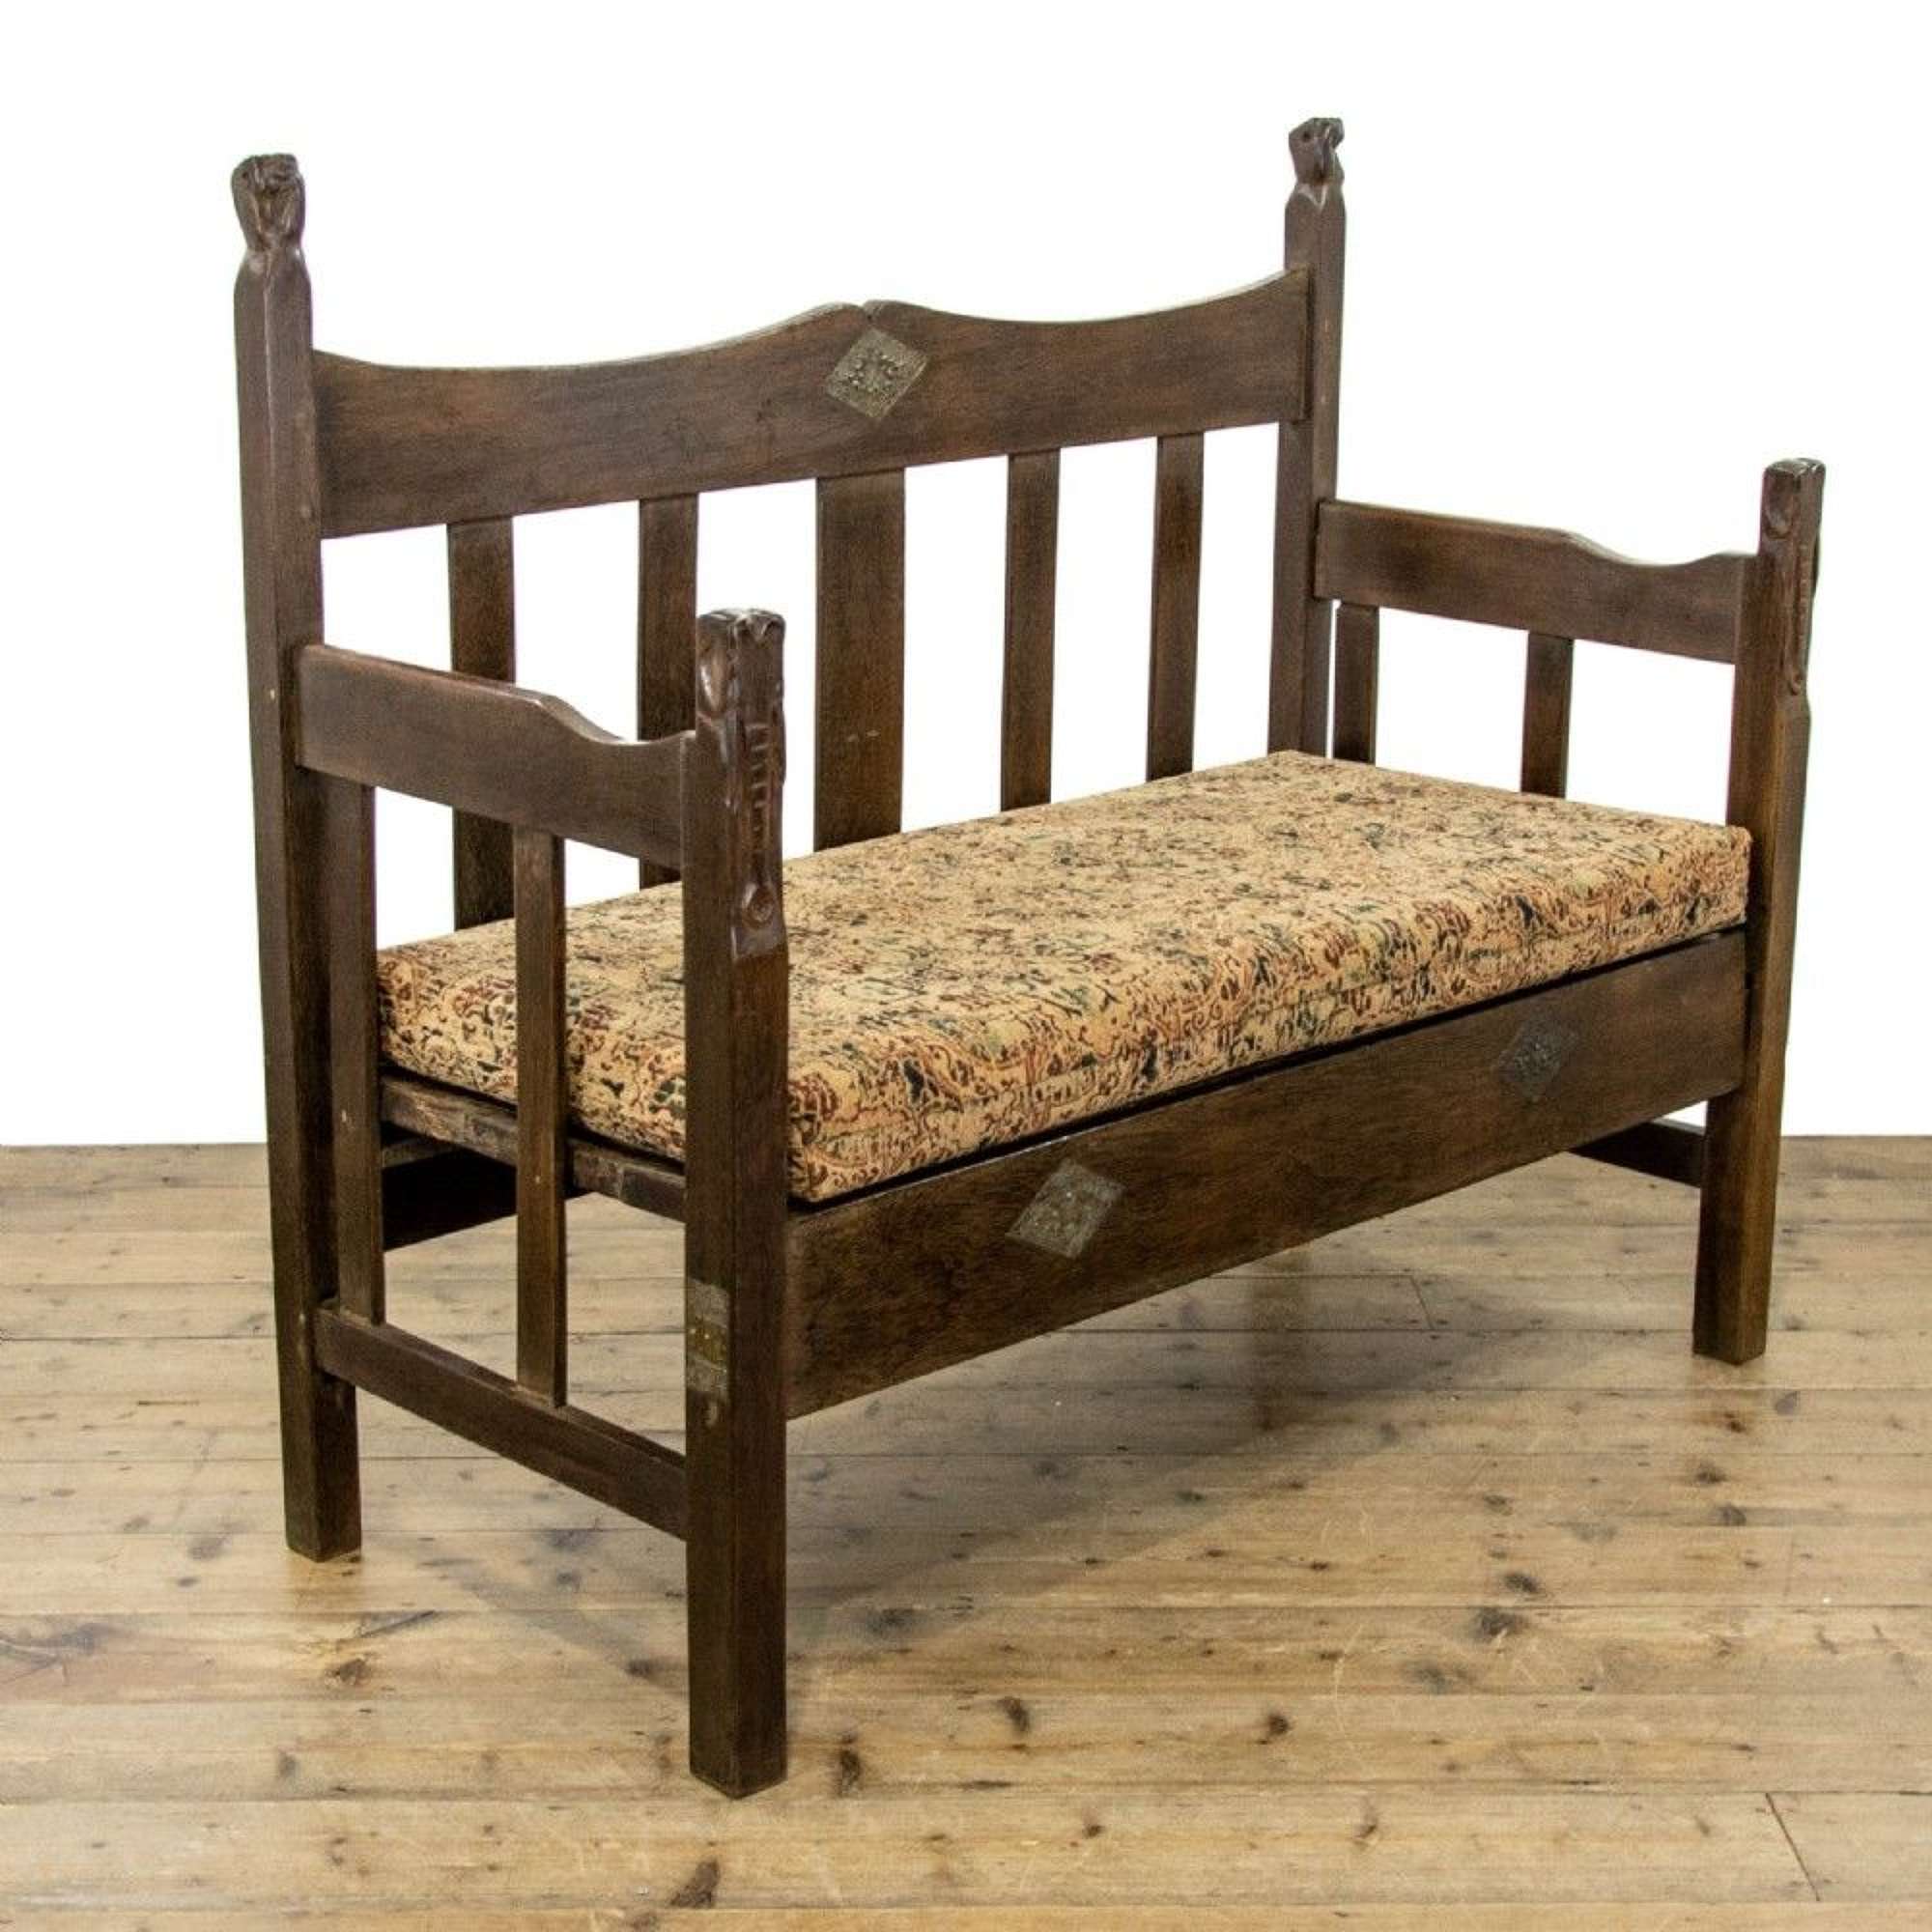 West African Antique Bench